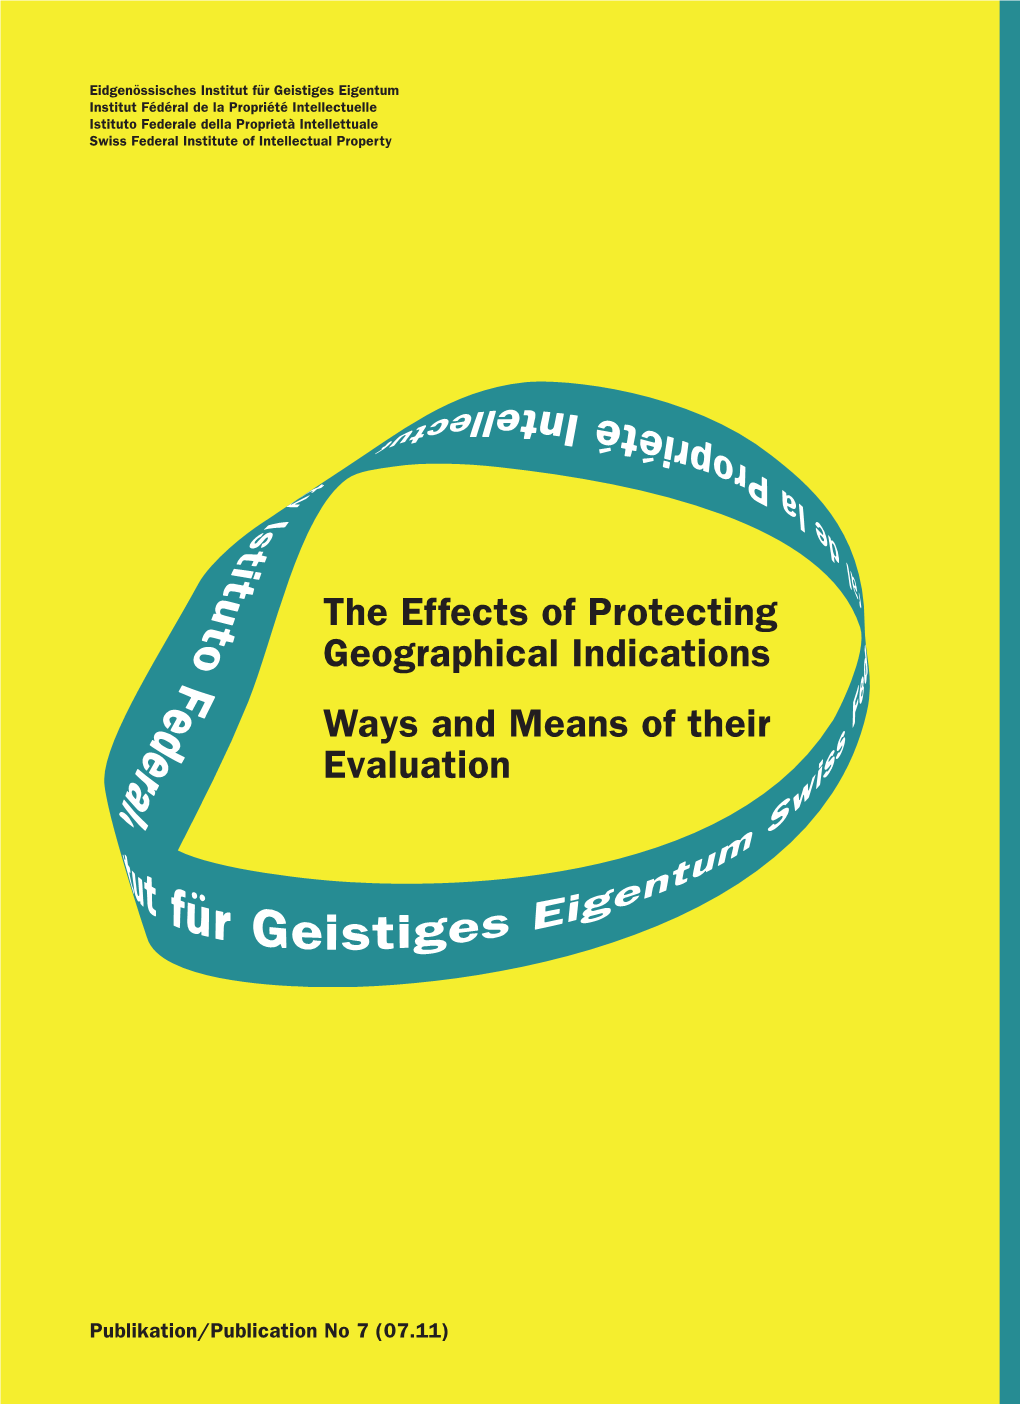 The Effects of Protecting Geographical Indications. Ways and Means Of